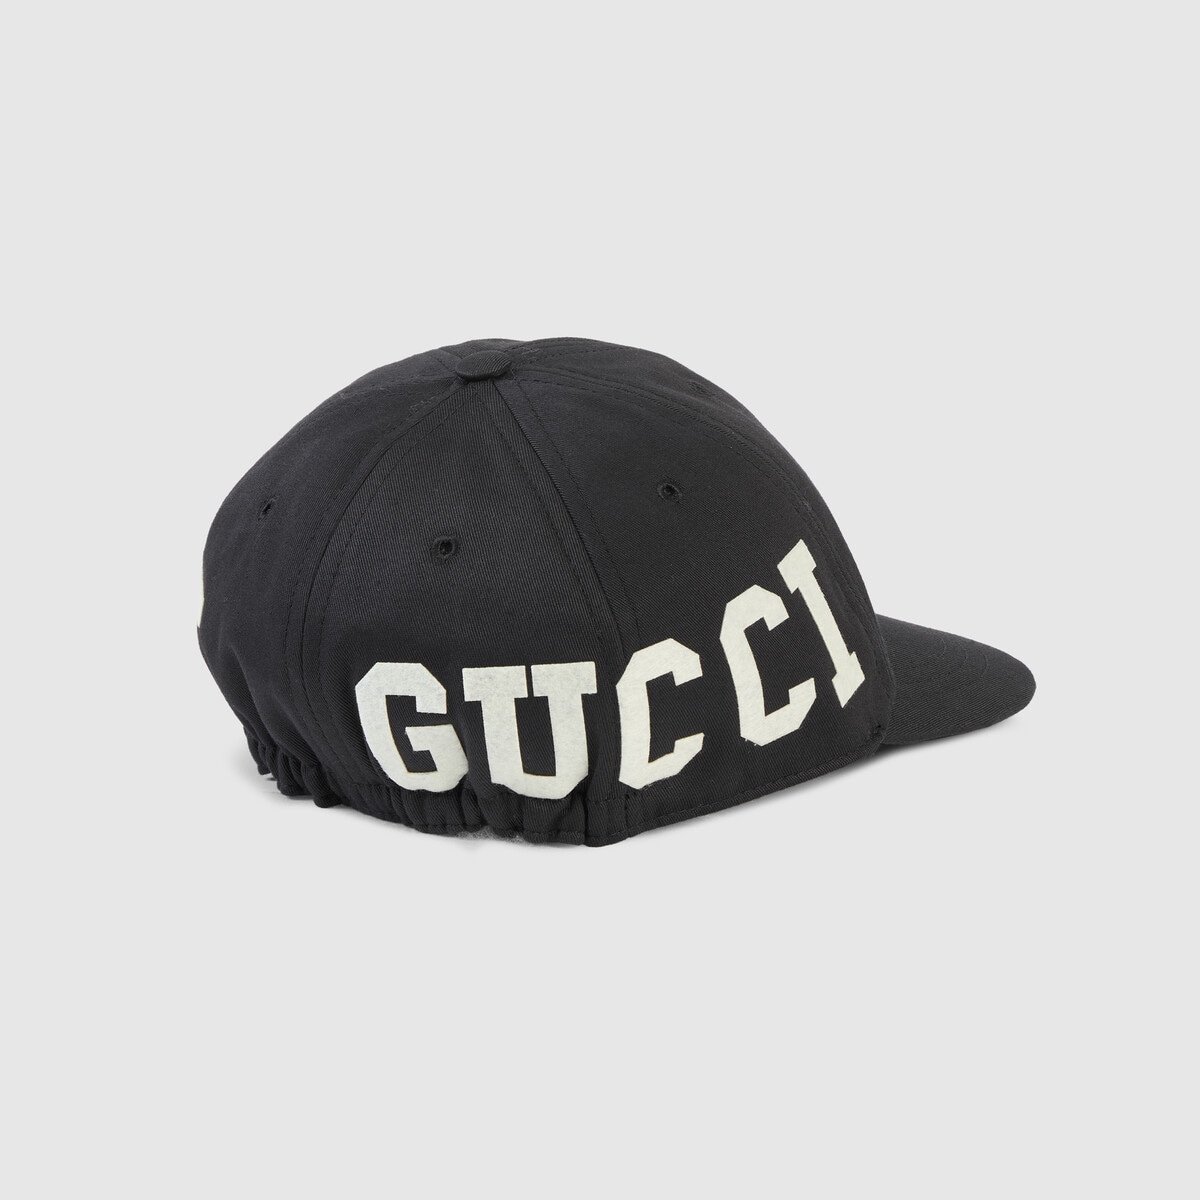 Cotton canvas baseball hat with Gucci patch - 5